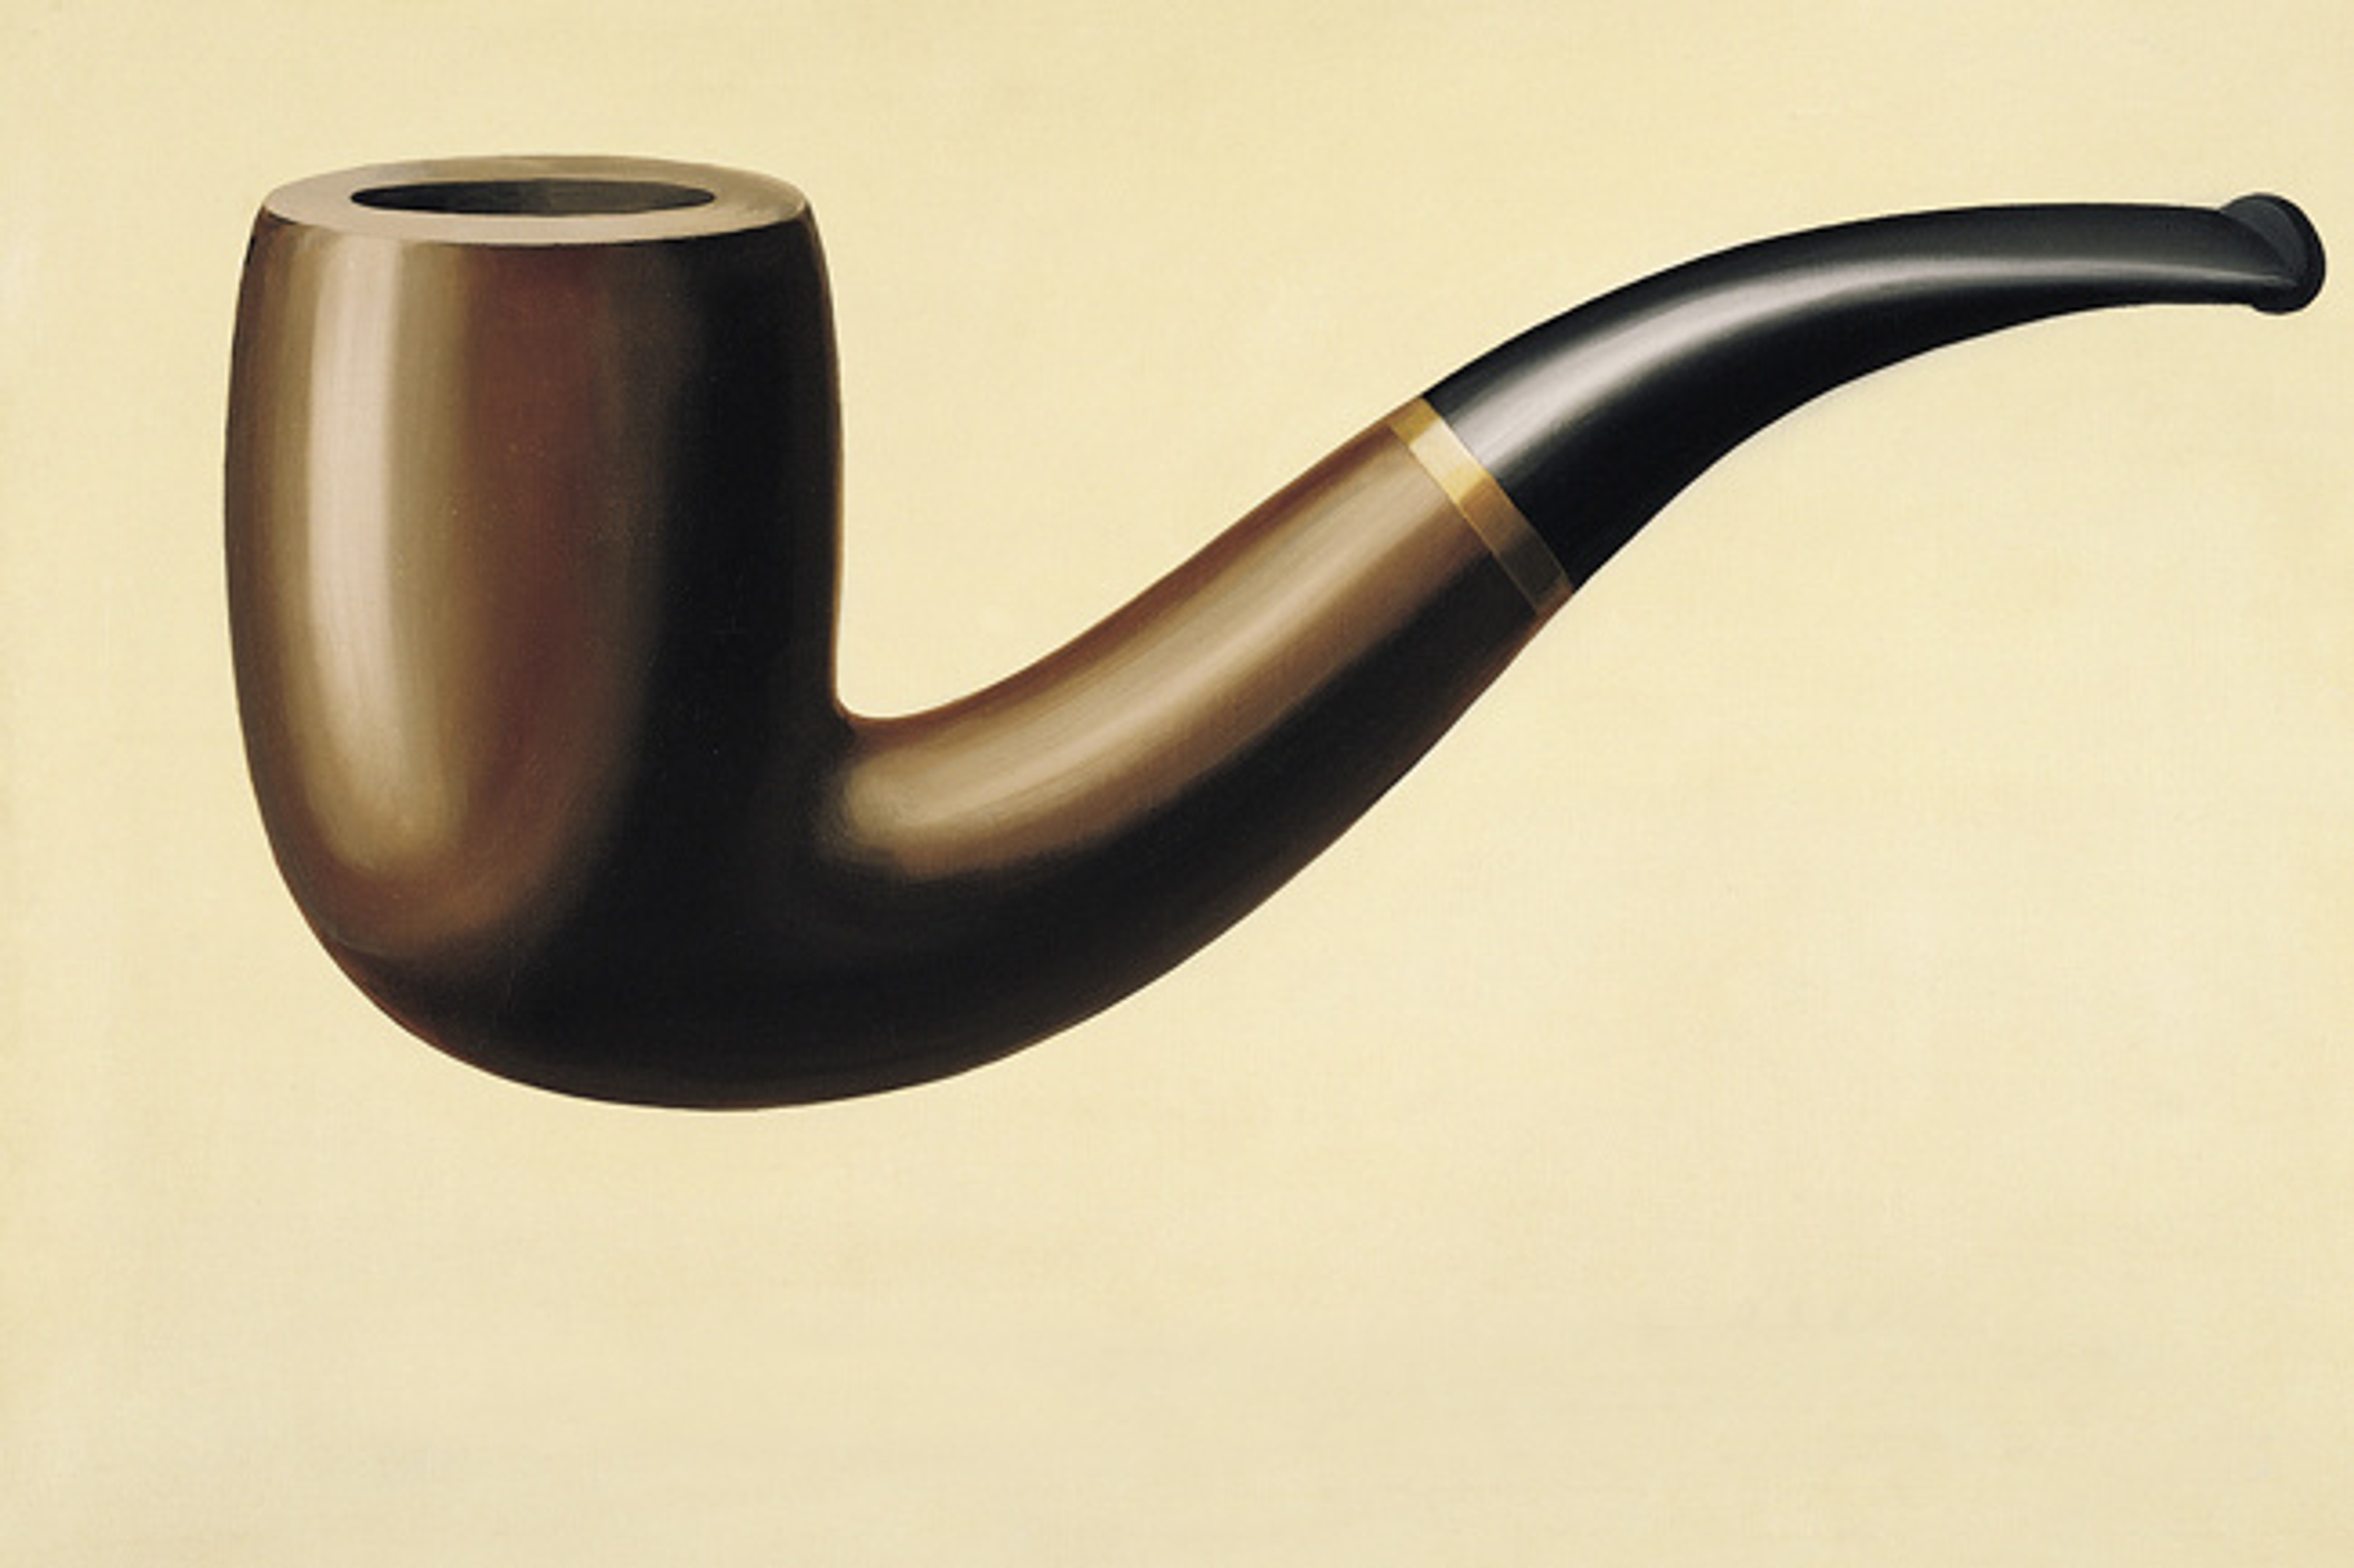 New Feature: Paintings On The Wall - René Magritte (1898 - 1967)